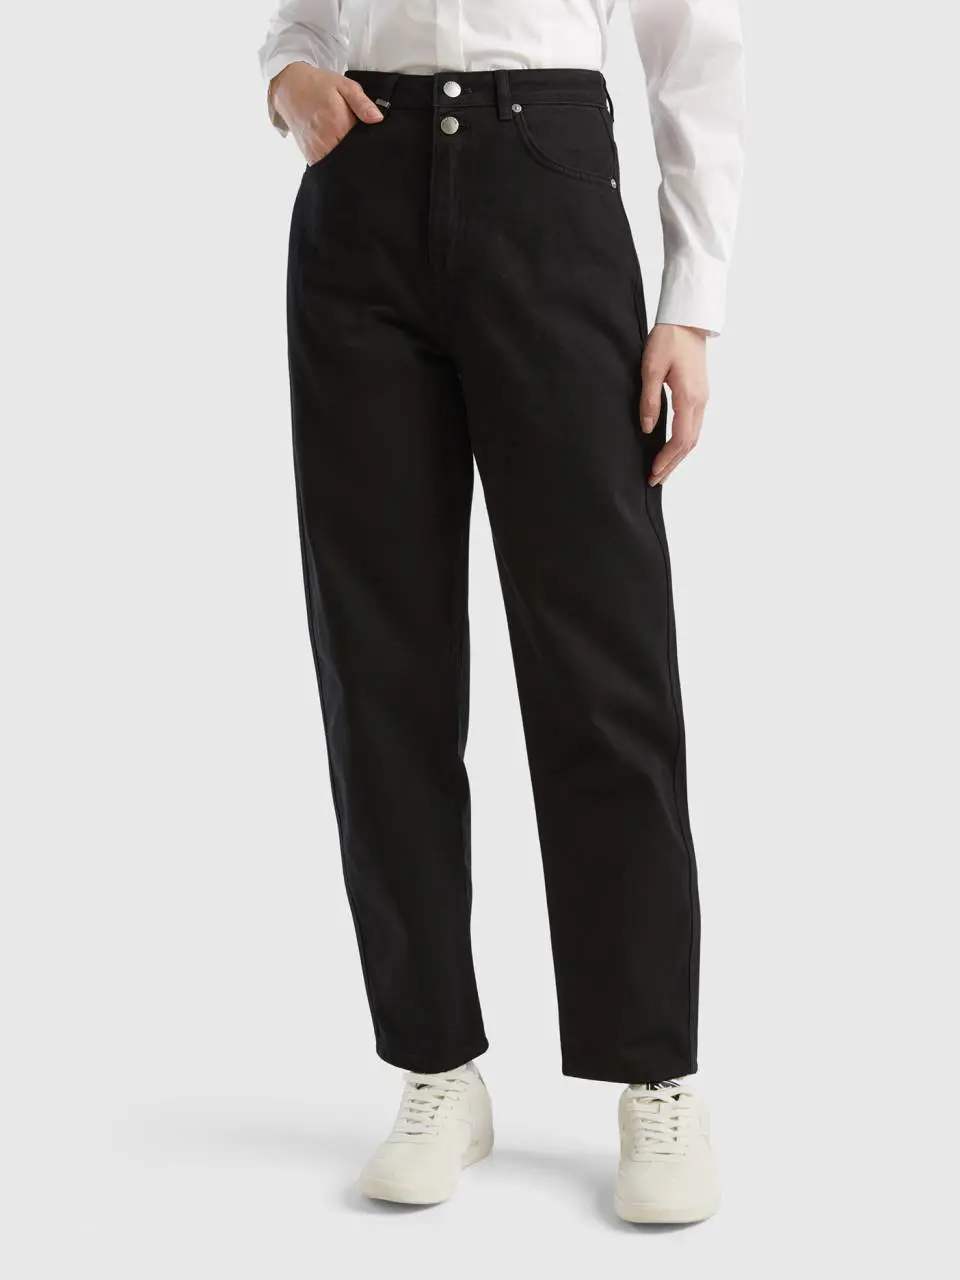 Benetton mom fit trousers. 1